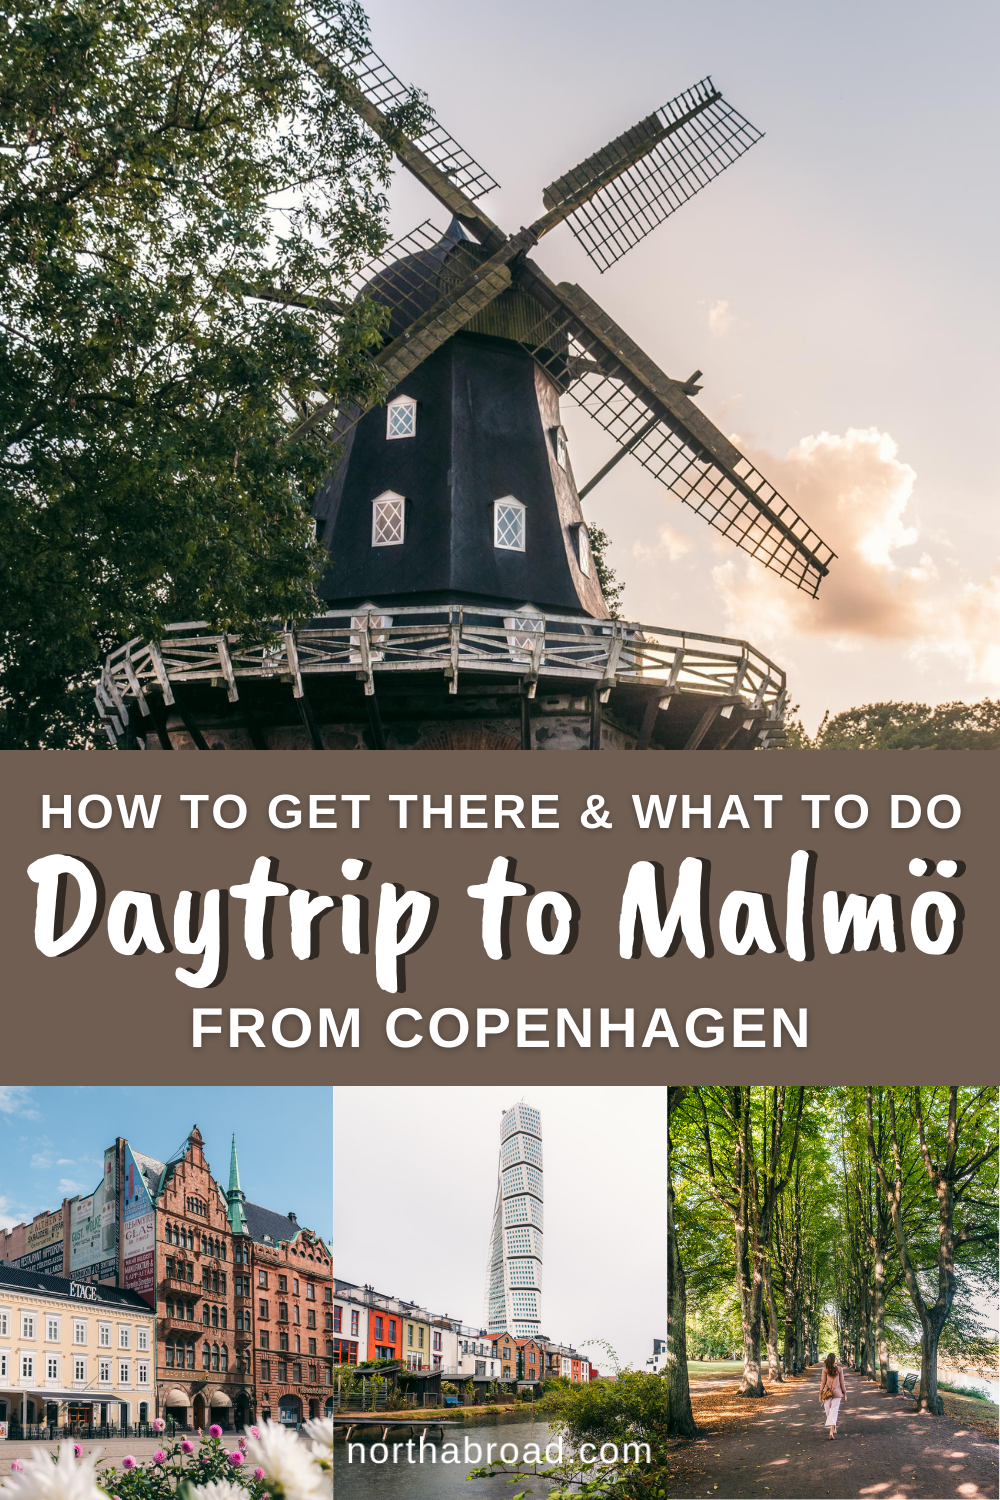 Day Trip to Malmö From Copenhagen: How to Get There & What to Do